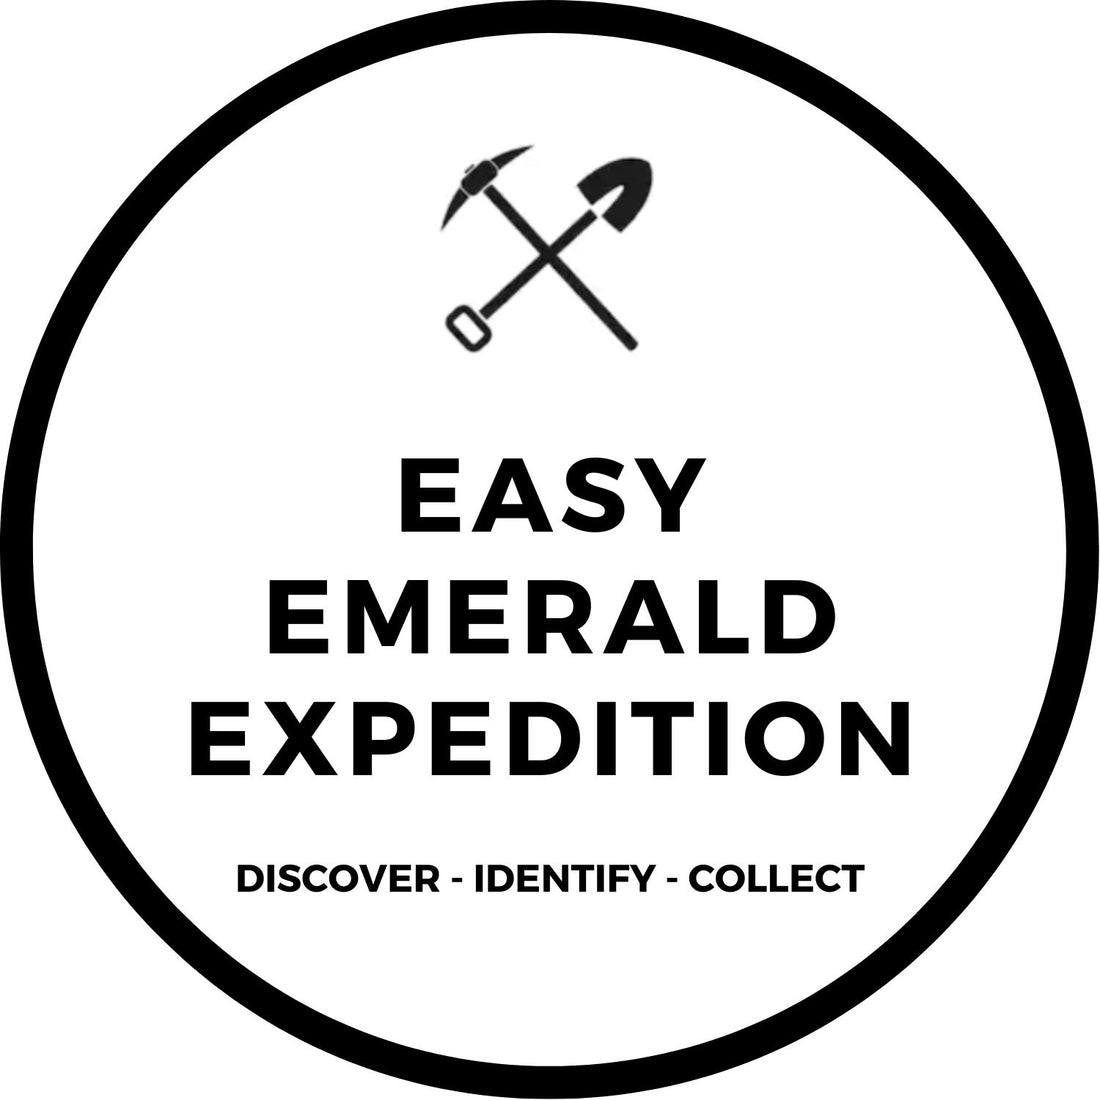 EASY EMERALD EXPEDITION